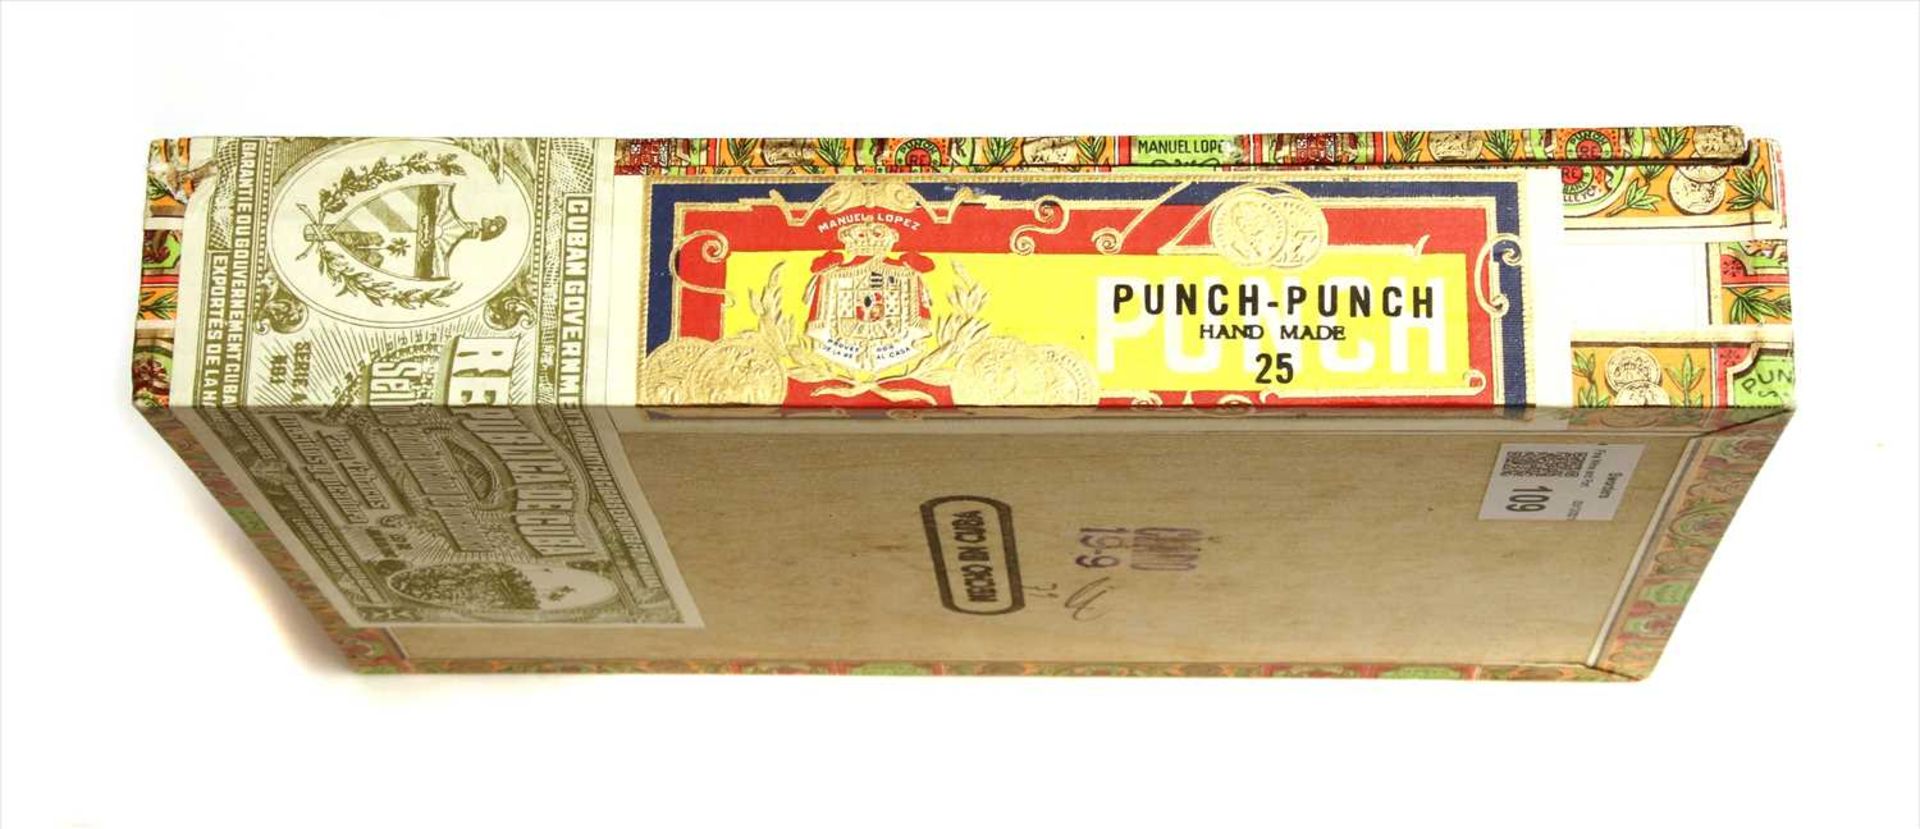 J. Valle & Co, Manuel Lopez, 25 Punch-Punch, boxed - Image 3 of 4